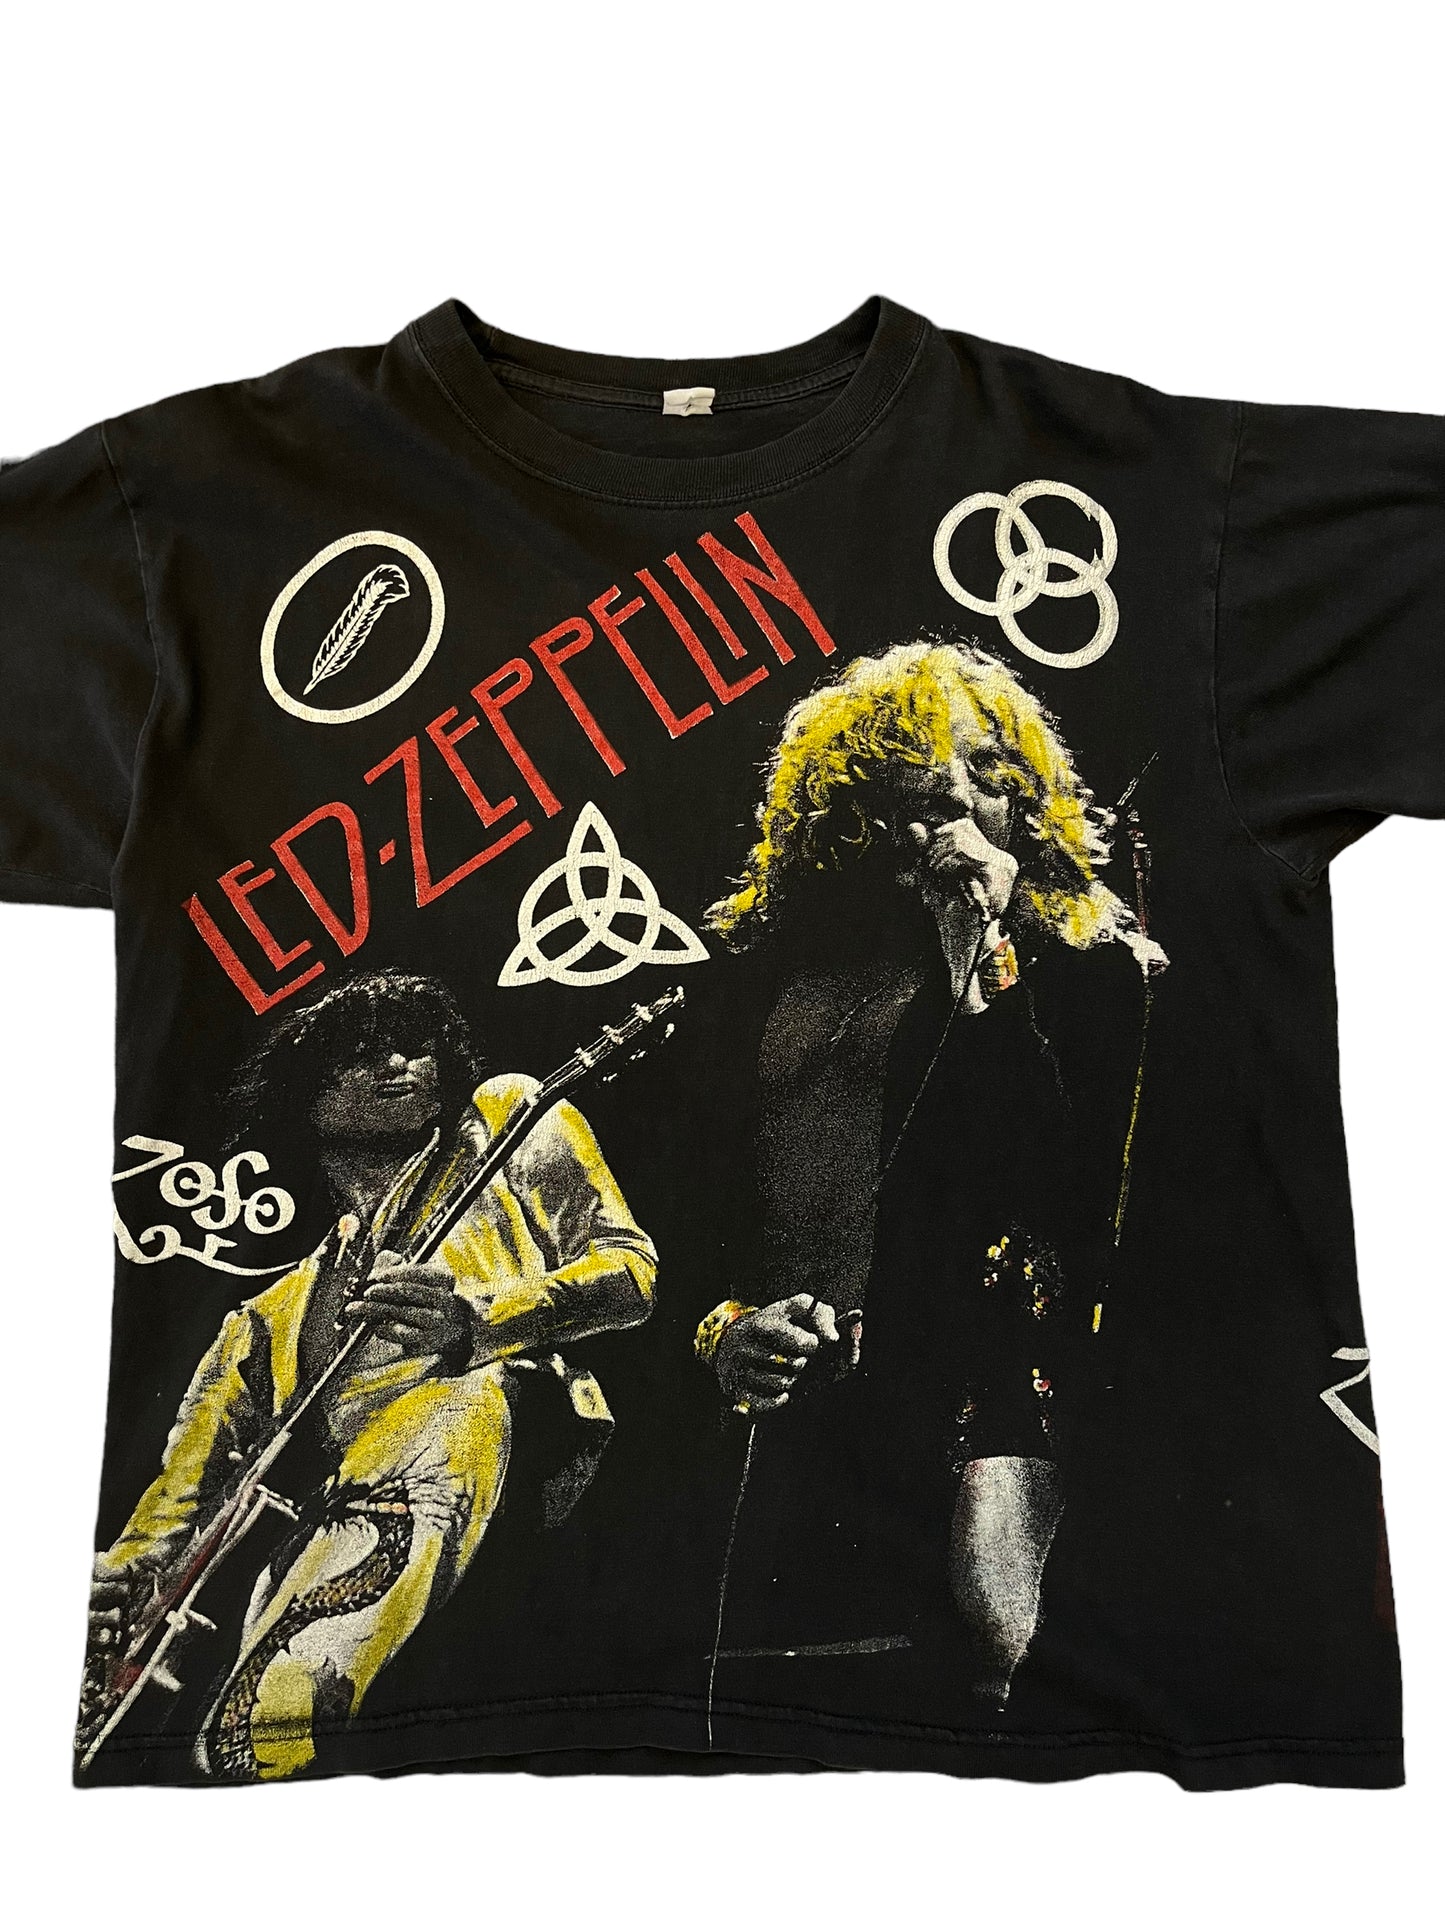 (S/M) Vintage Led Zeppelin Double Sided Tee